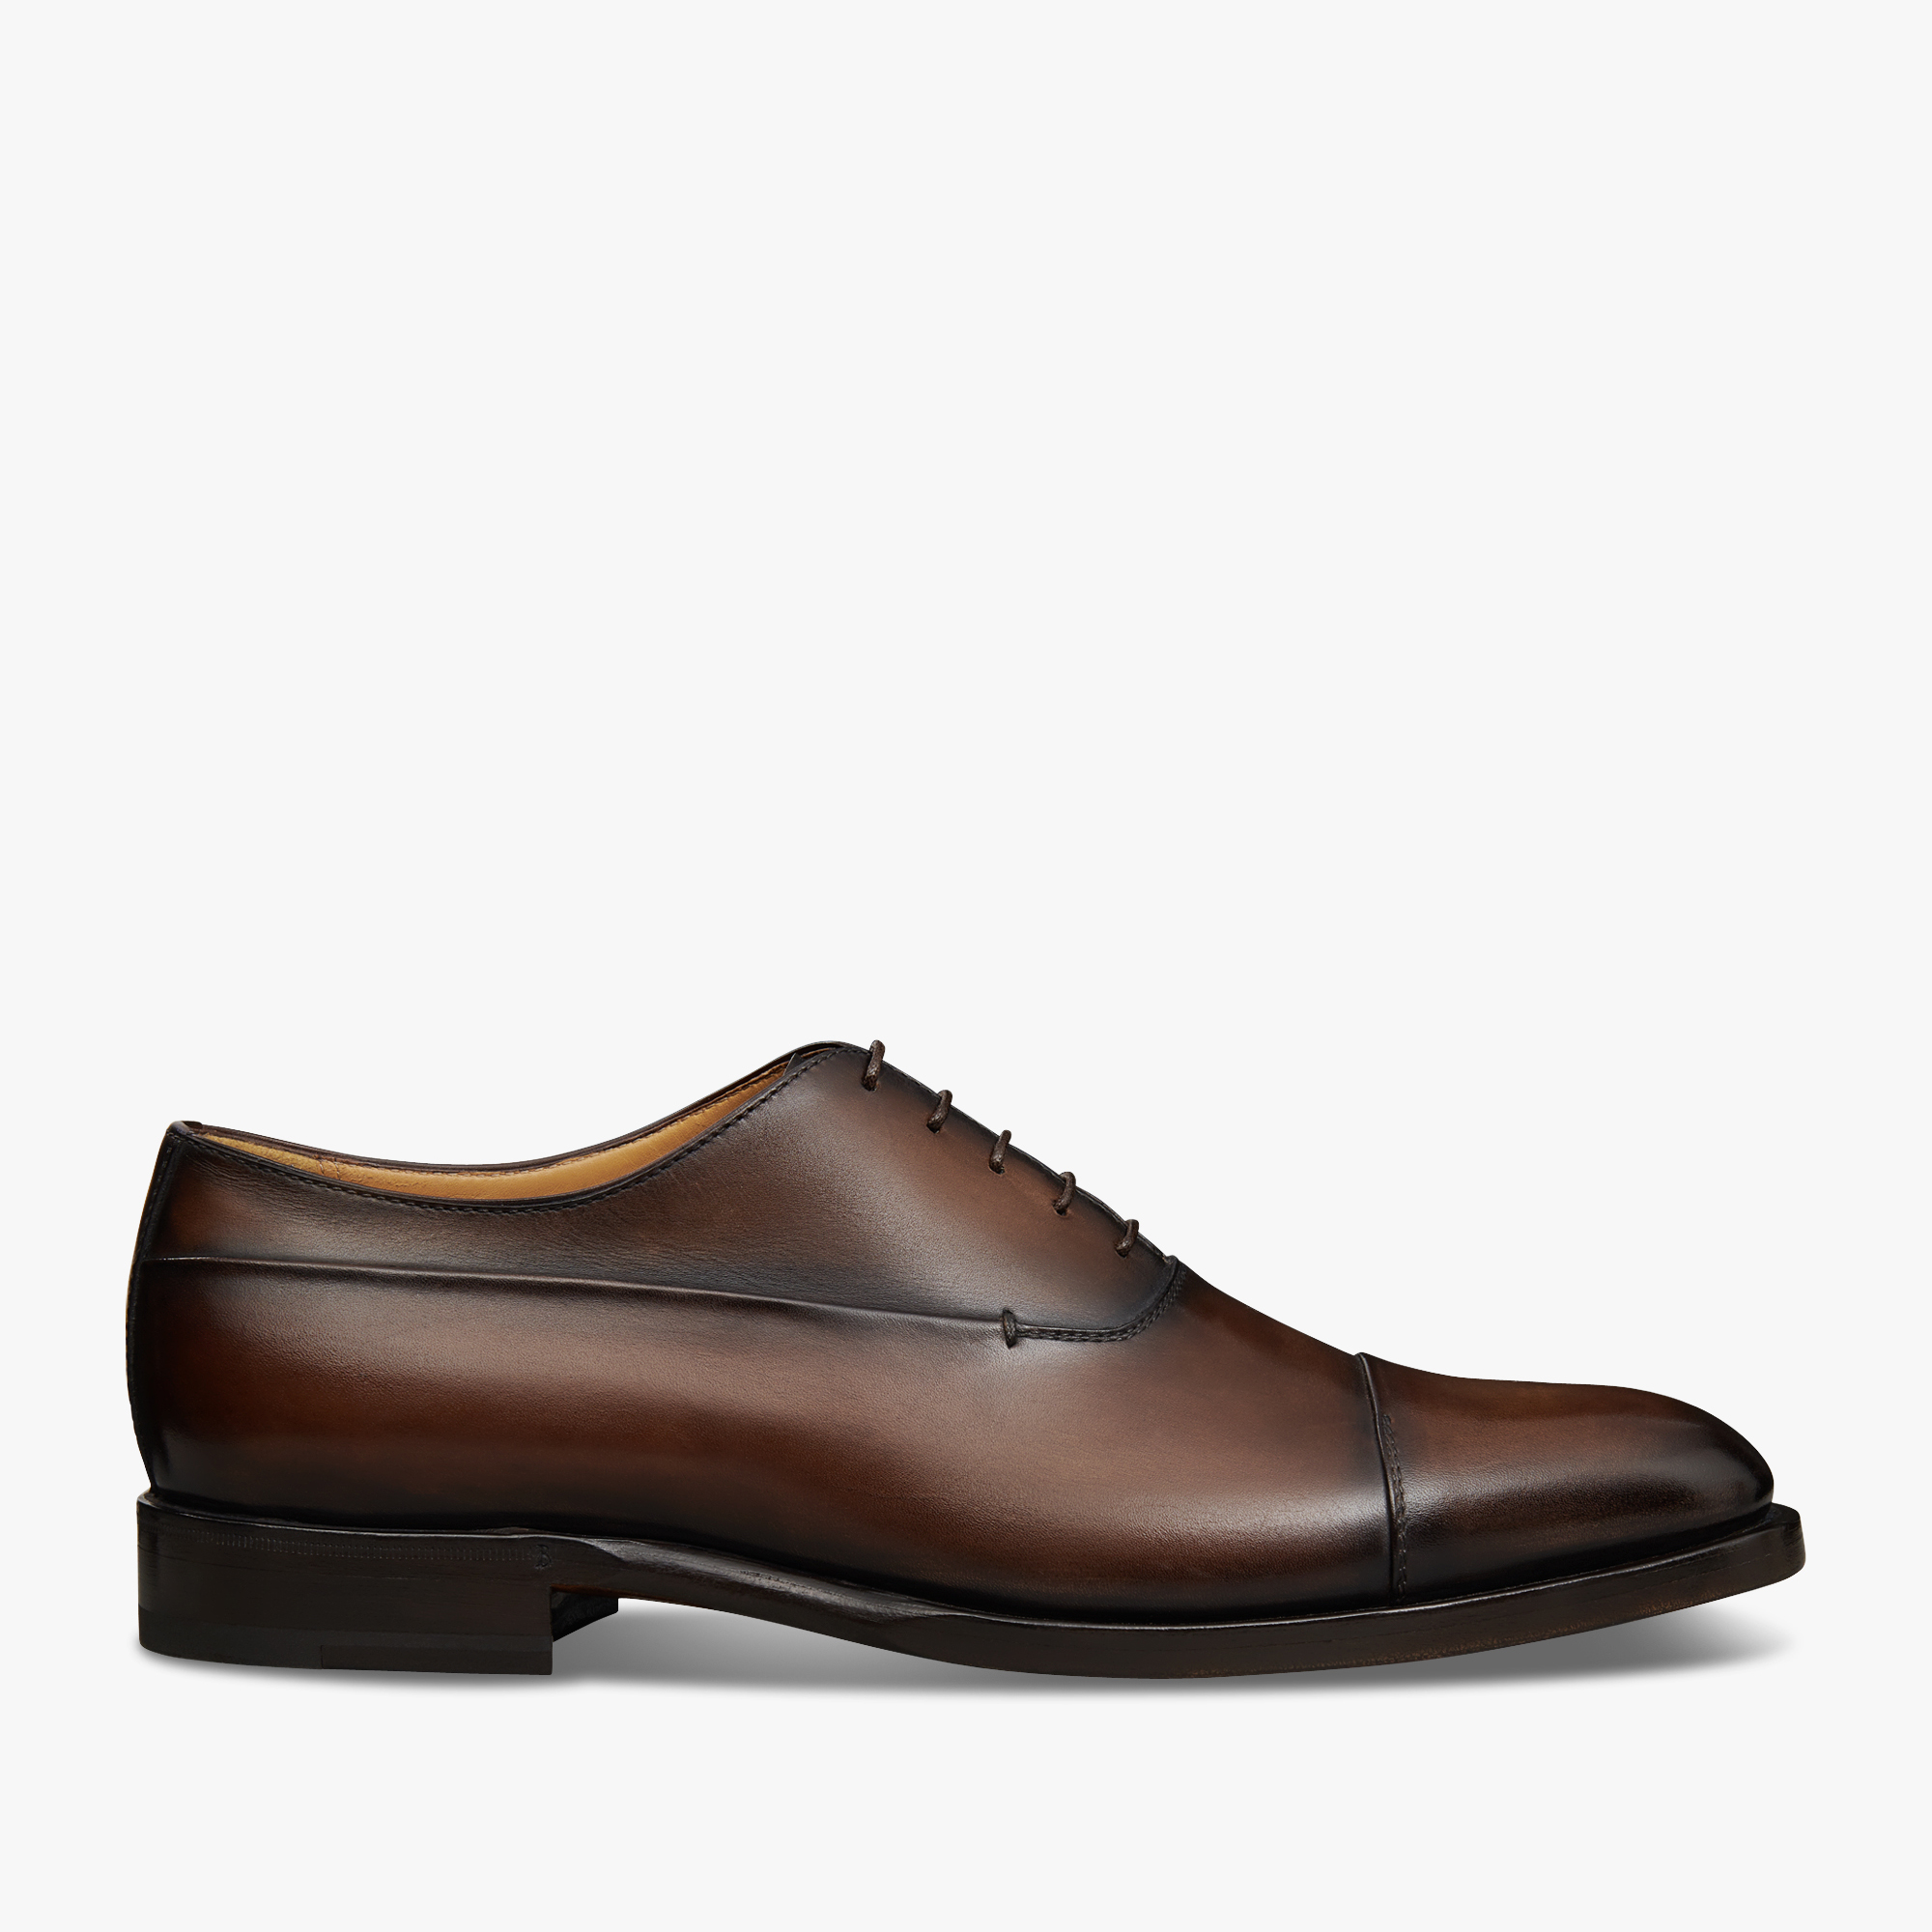 Equilibre Leather Oxford, TDM INTENSO, hi-res